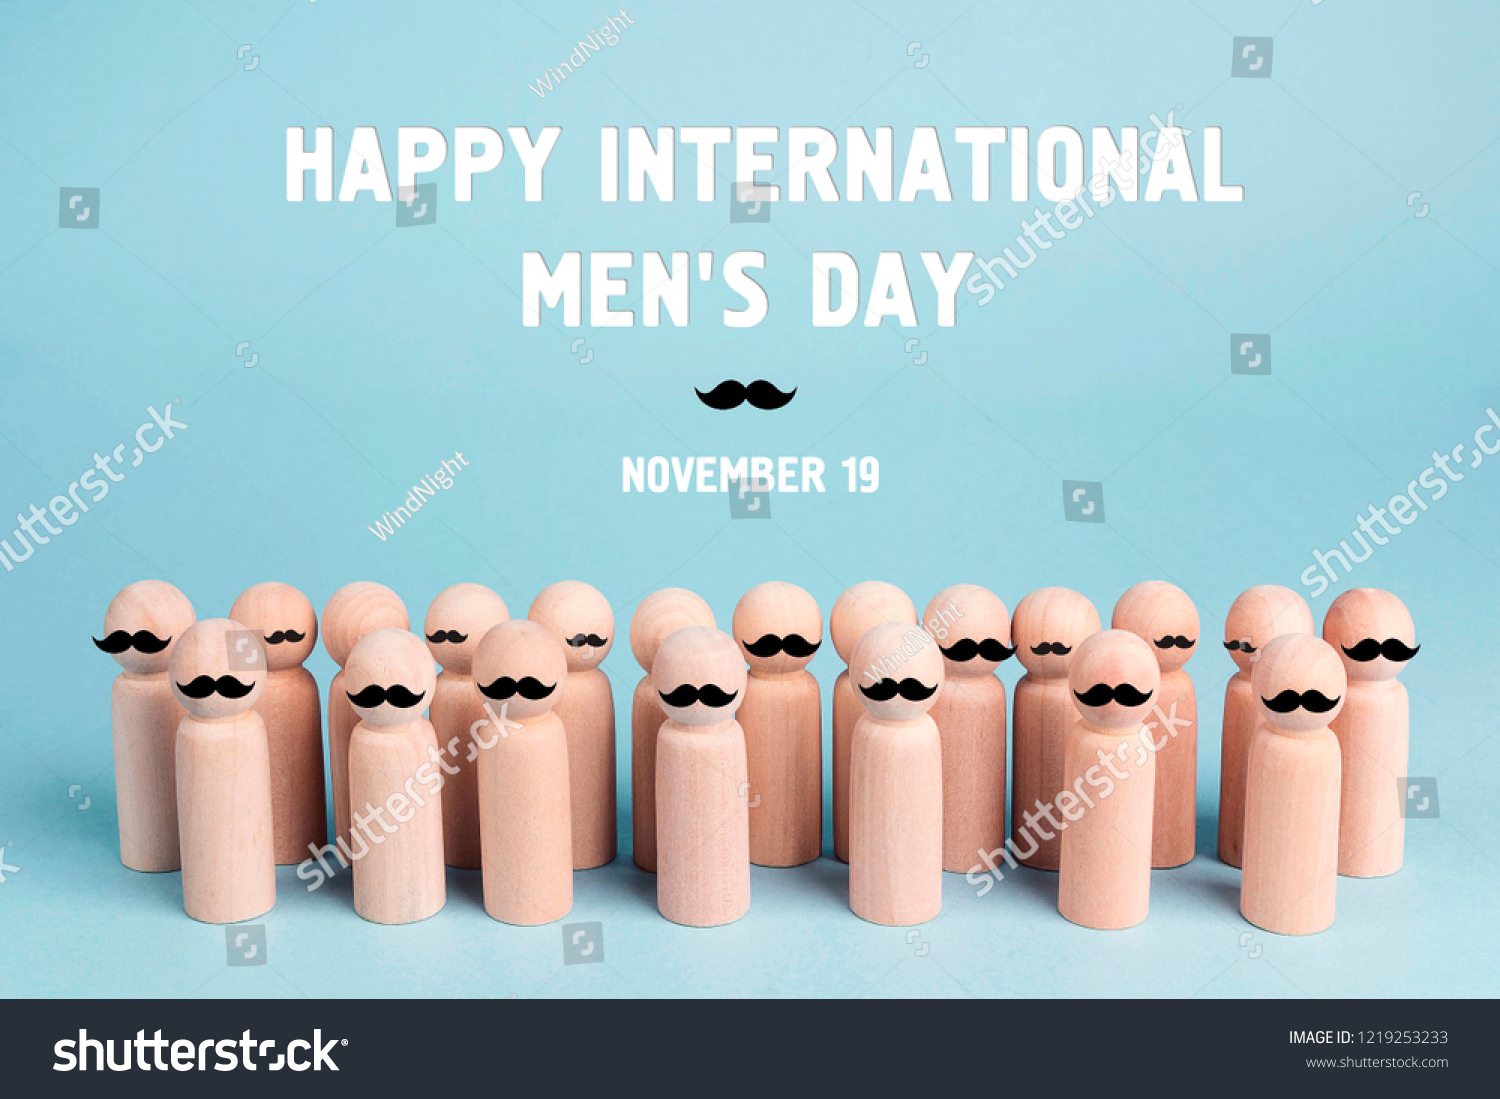 International men's day background with wooden dolls with a mustache on a blue background. #1219253233